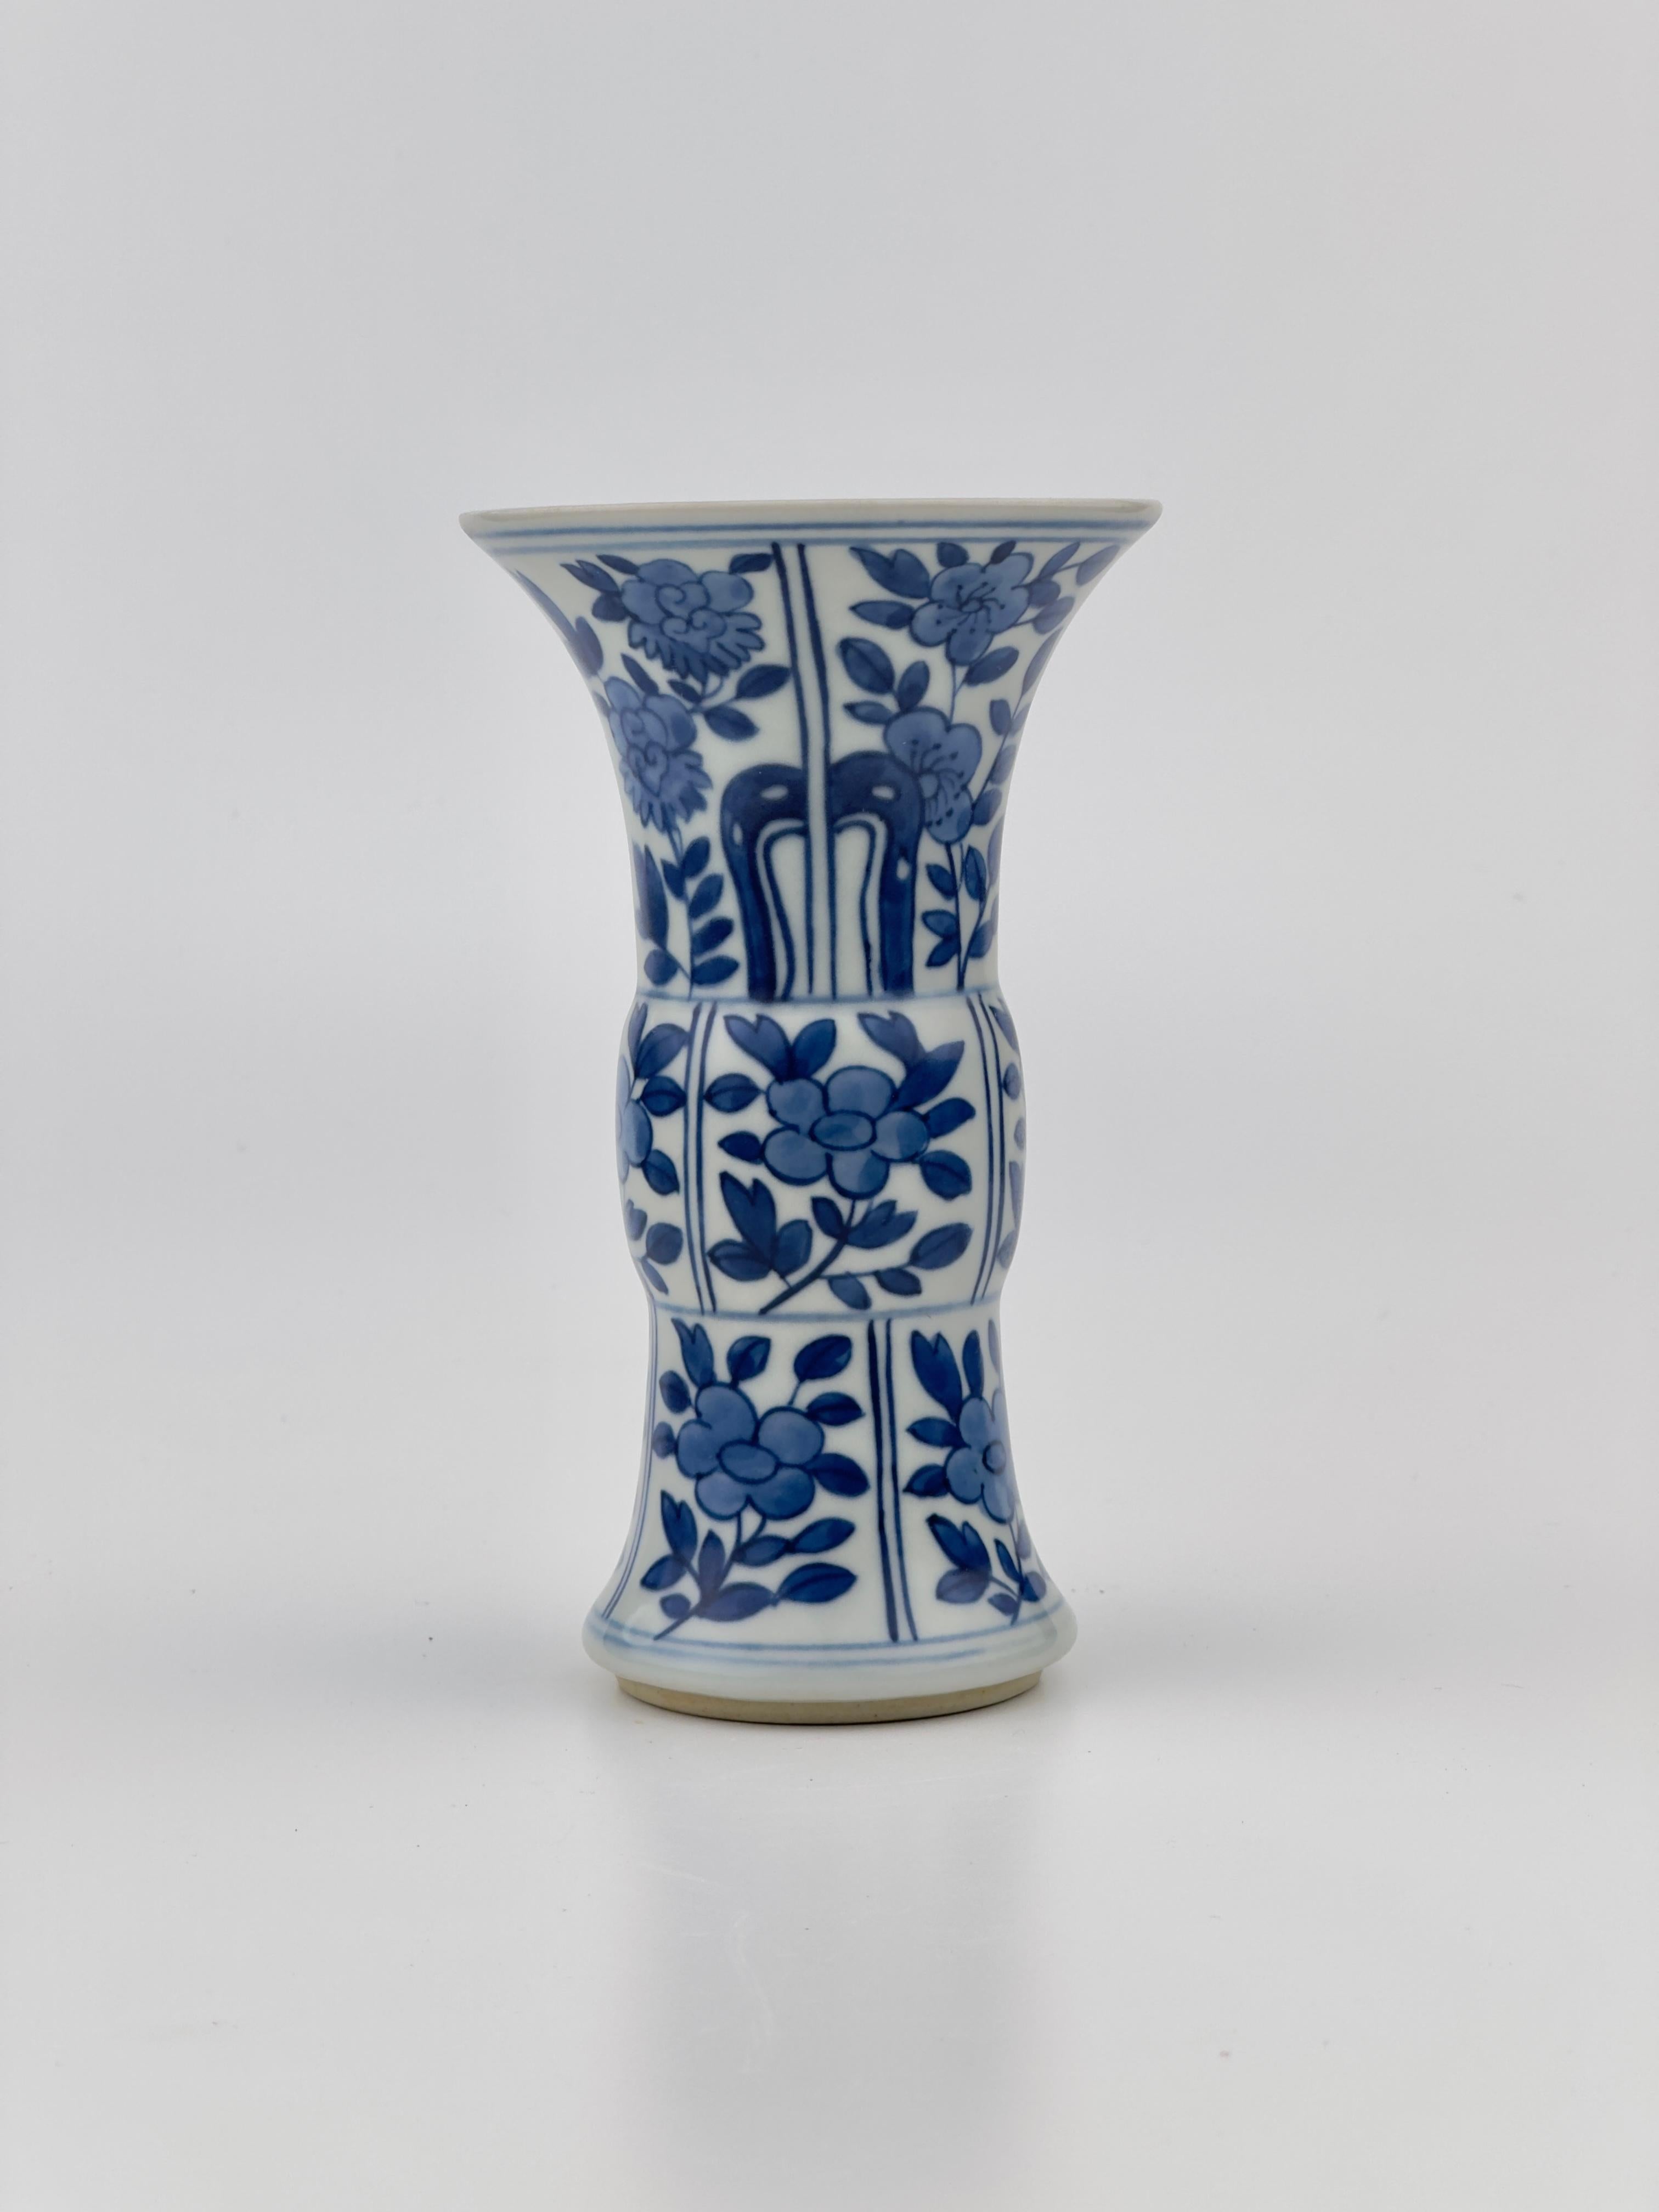 An attractive GU vase hand painted in cobalt blue with typical kangxi flower panels painting separated by lined borders. 

Period : Qing Dynasty, Kangxi Period
Production Date : 1690-1699
Made in : Jingdezhen
Destination : Netherland
Found/Acquired